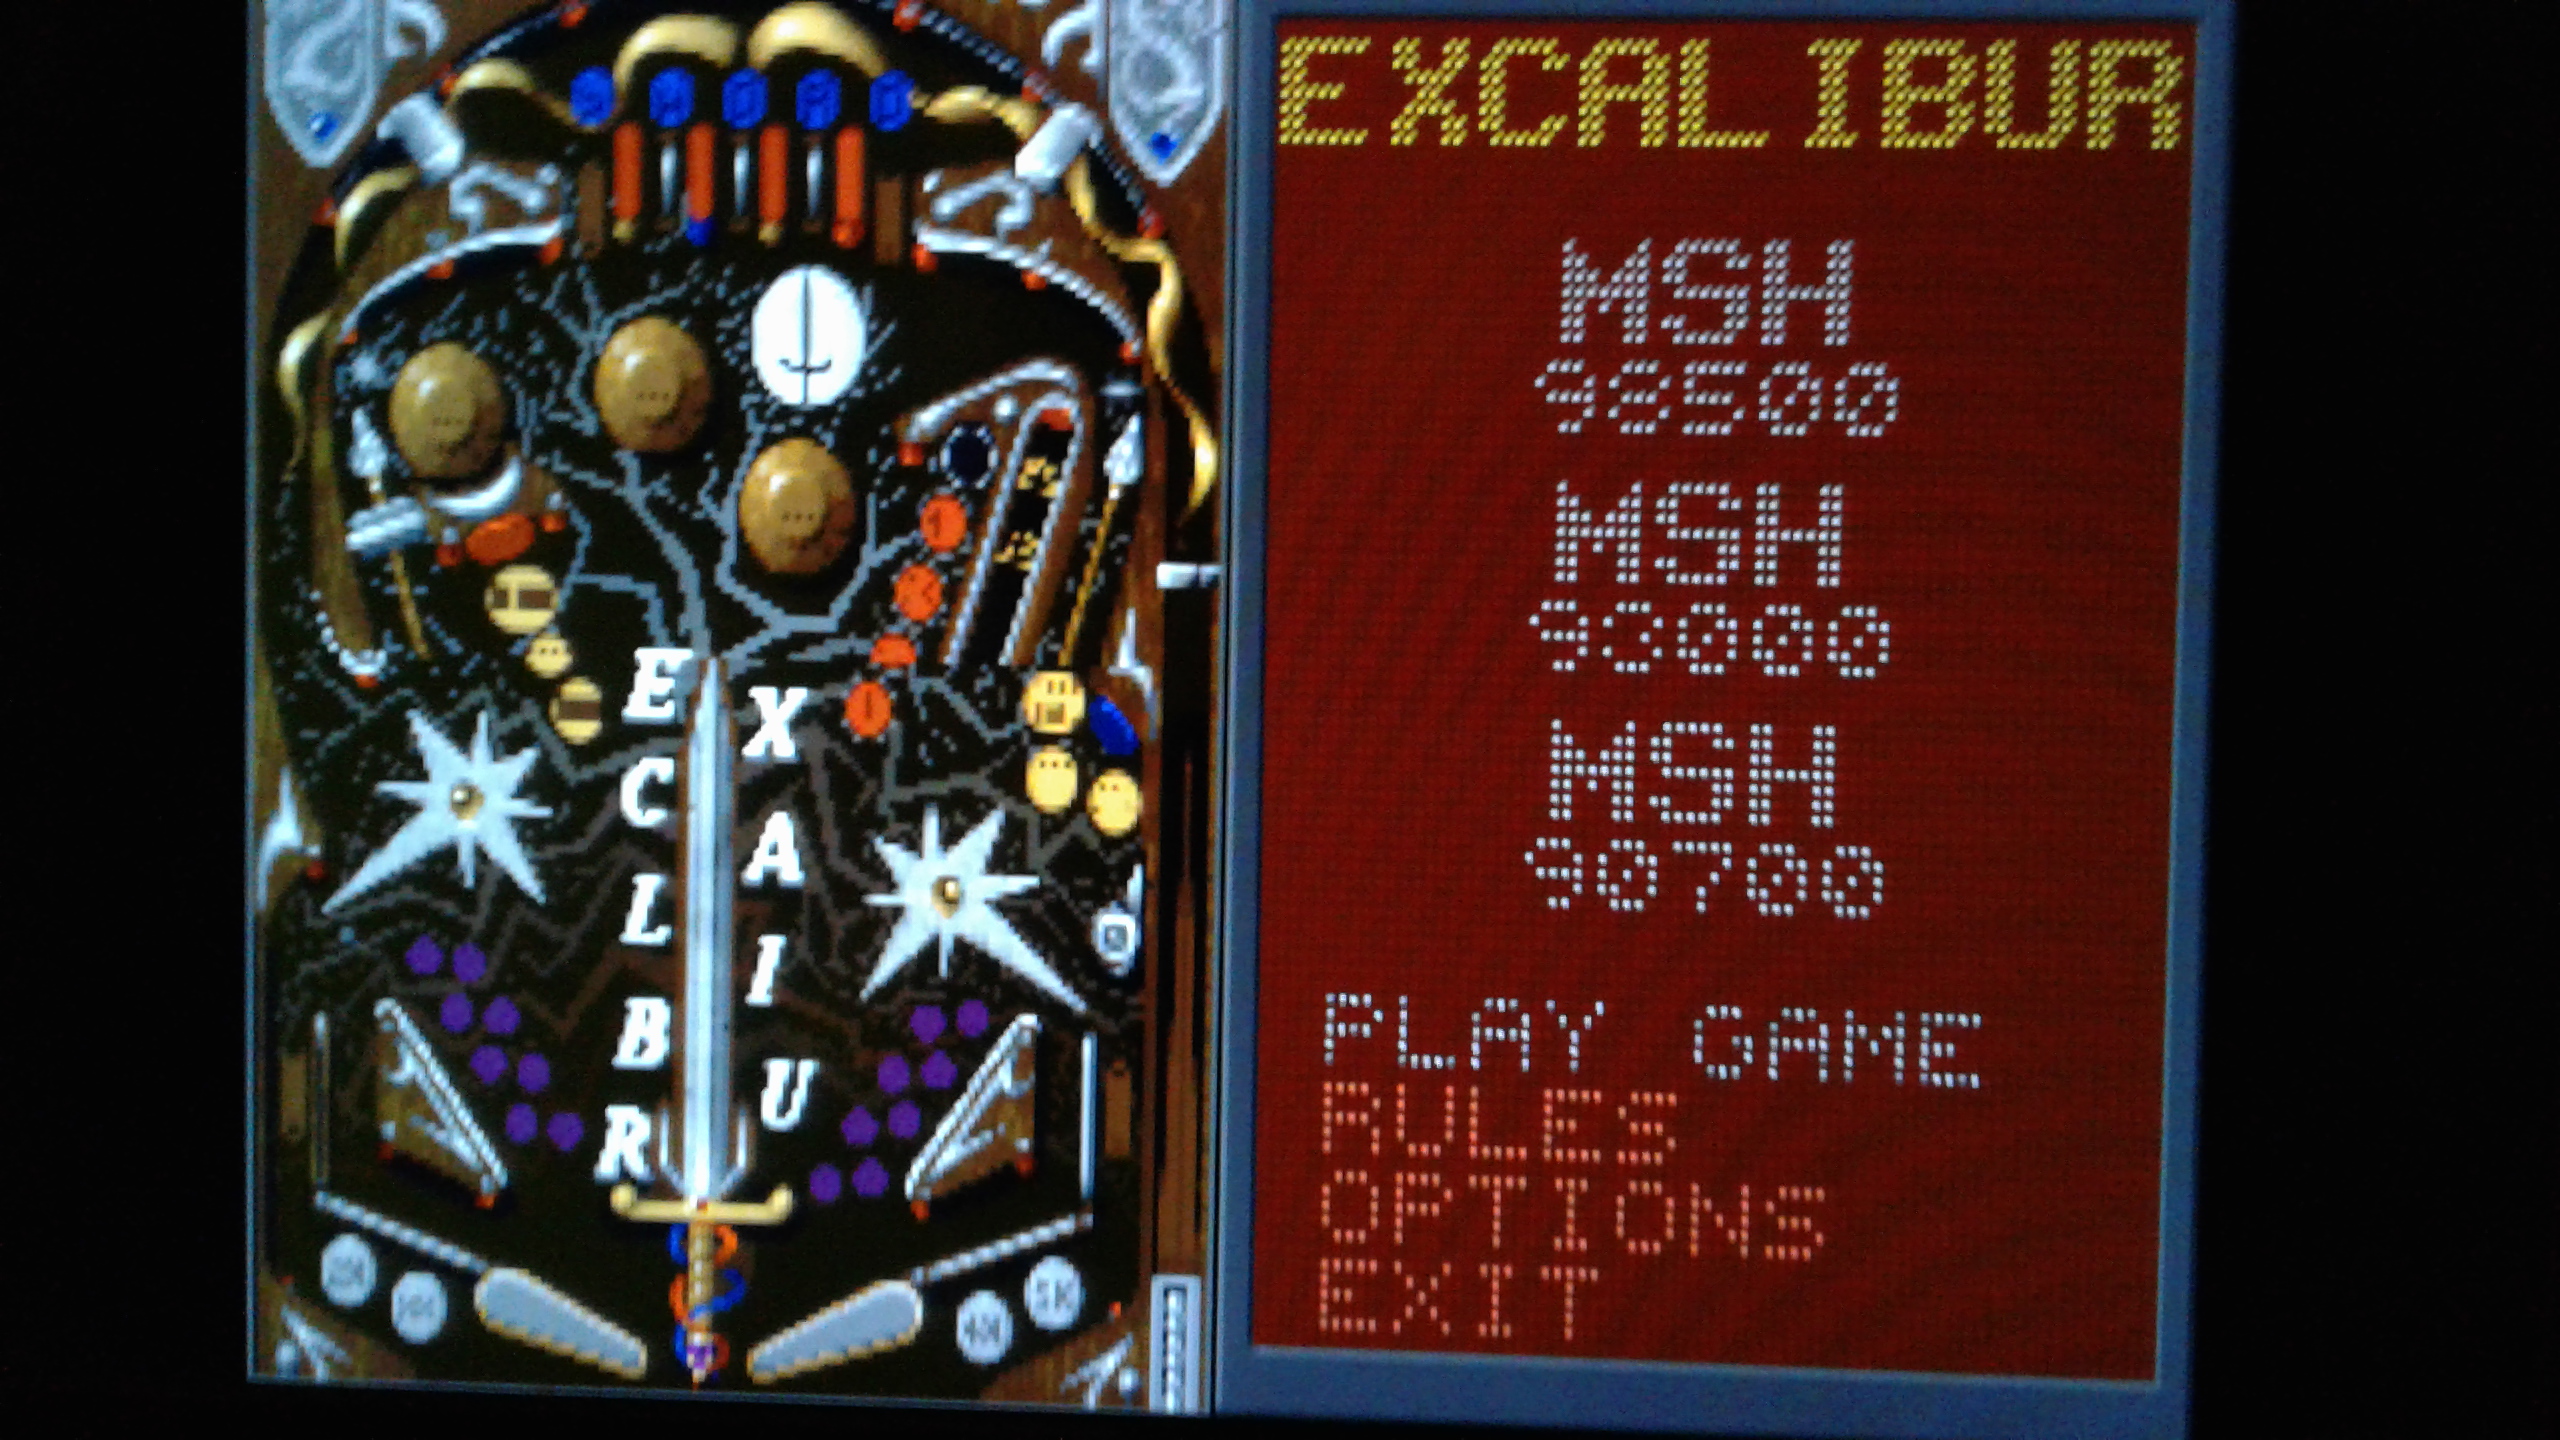 Mark: Epic Pinball: Excalibur (PC Emulated / DOSBox) 98,500 points on 2019-05-11 23:00:51